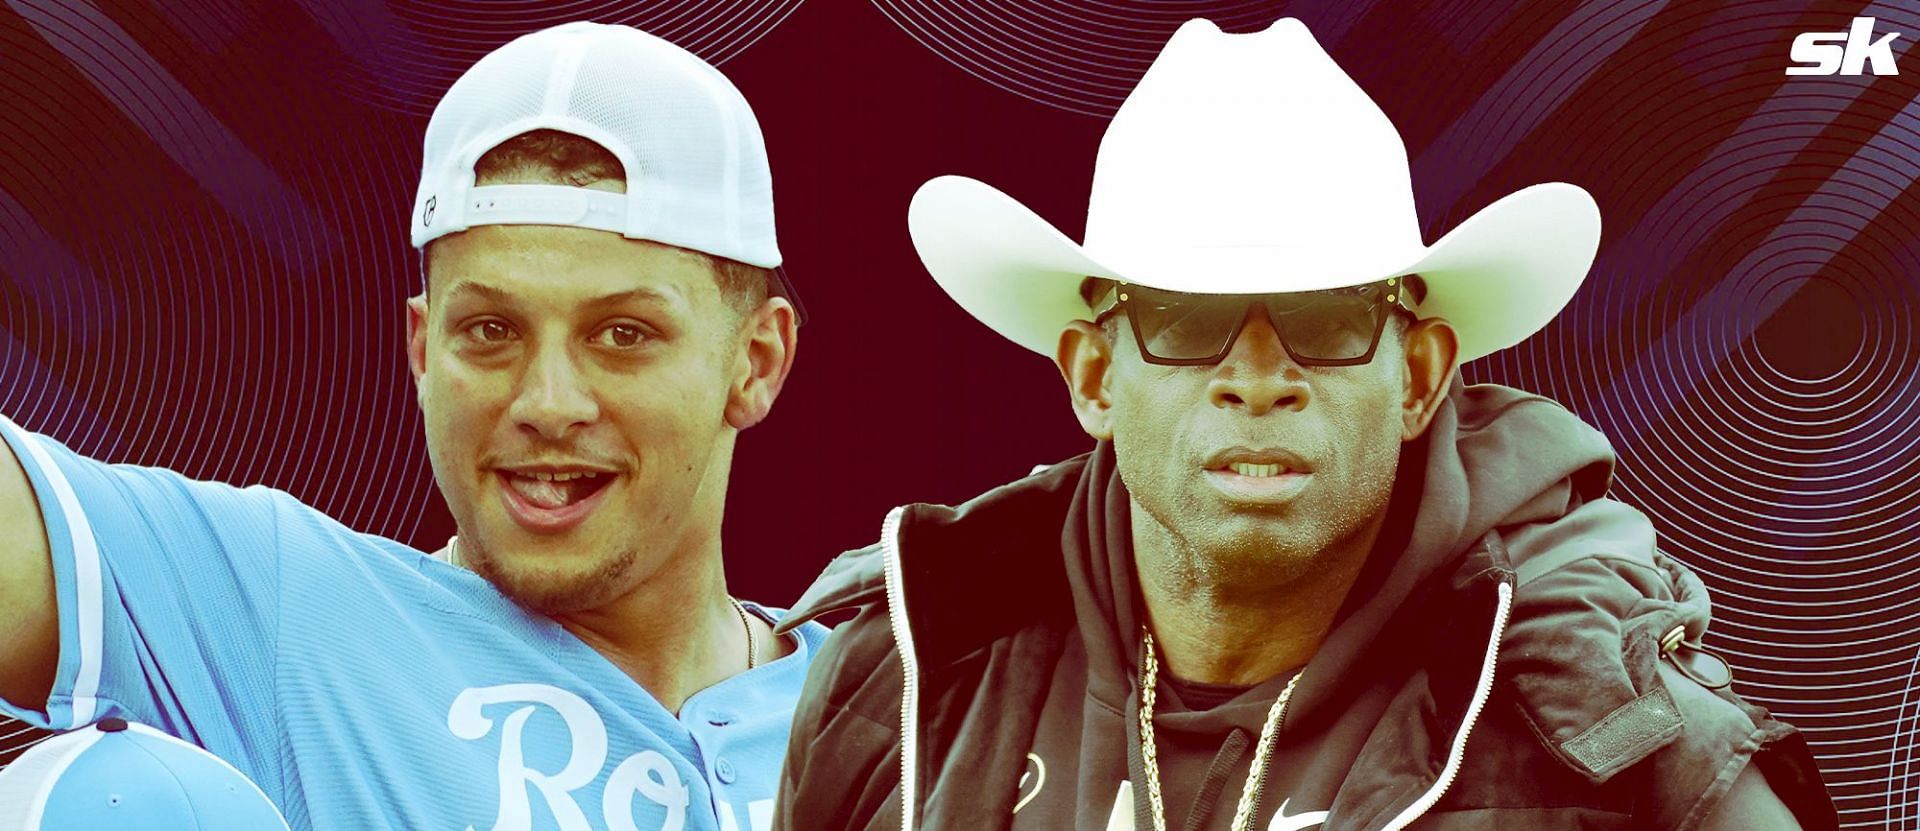 Could Patrick Mahomes pull a Deion Sanders? 2x MVP outlines plans for exploring baseball prowess